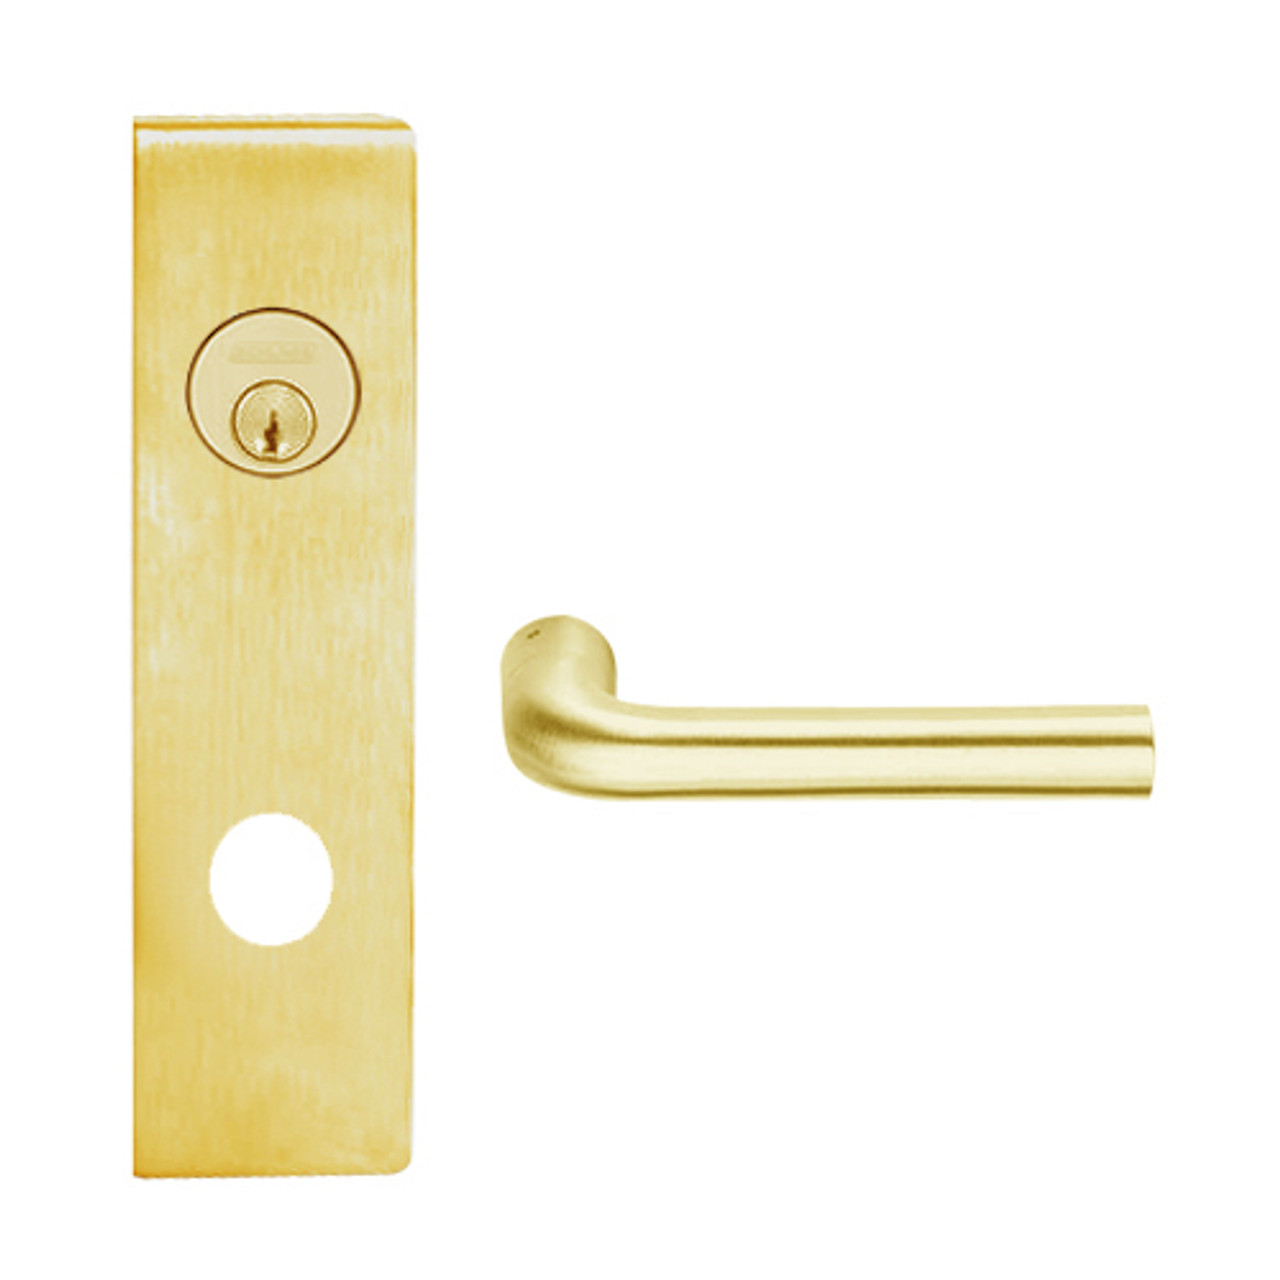 L9026L-02N-605 Schlage L Series Less Cylinder Exit Lock with Cylinder Commercial Mortise Lock with 02 Cast Lever Design in Bright Brass